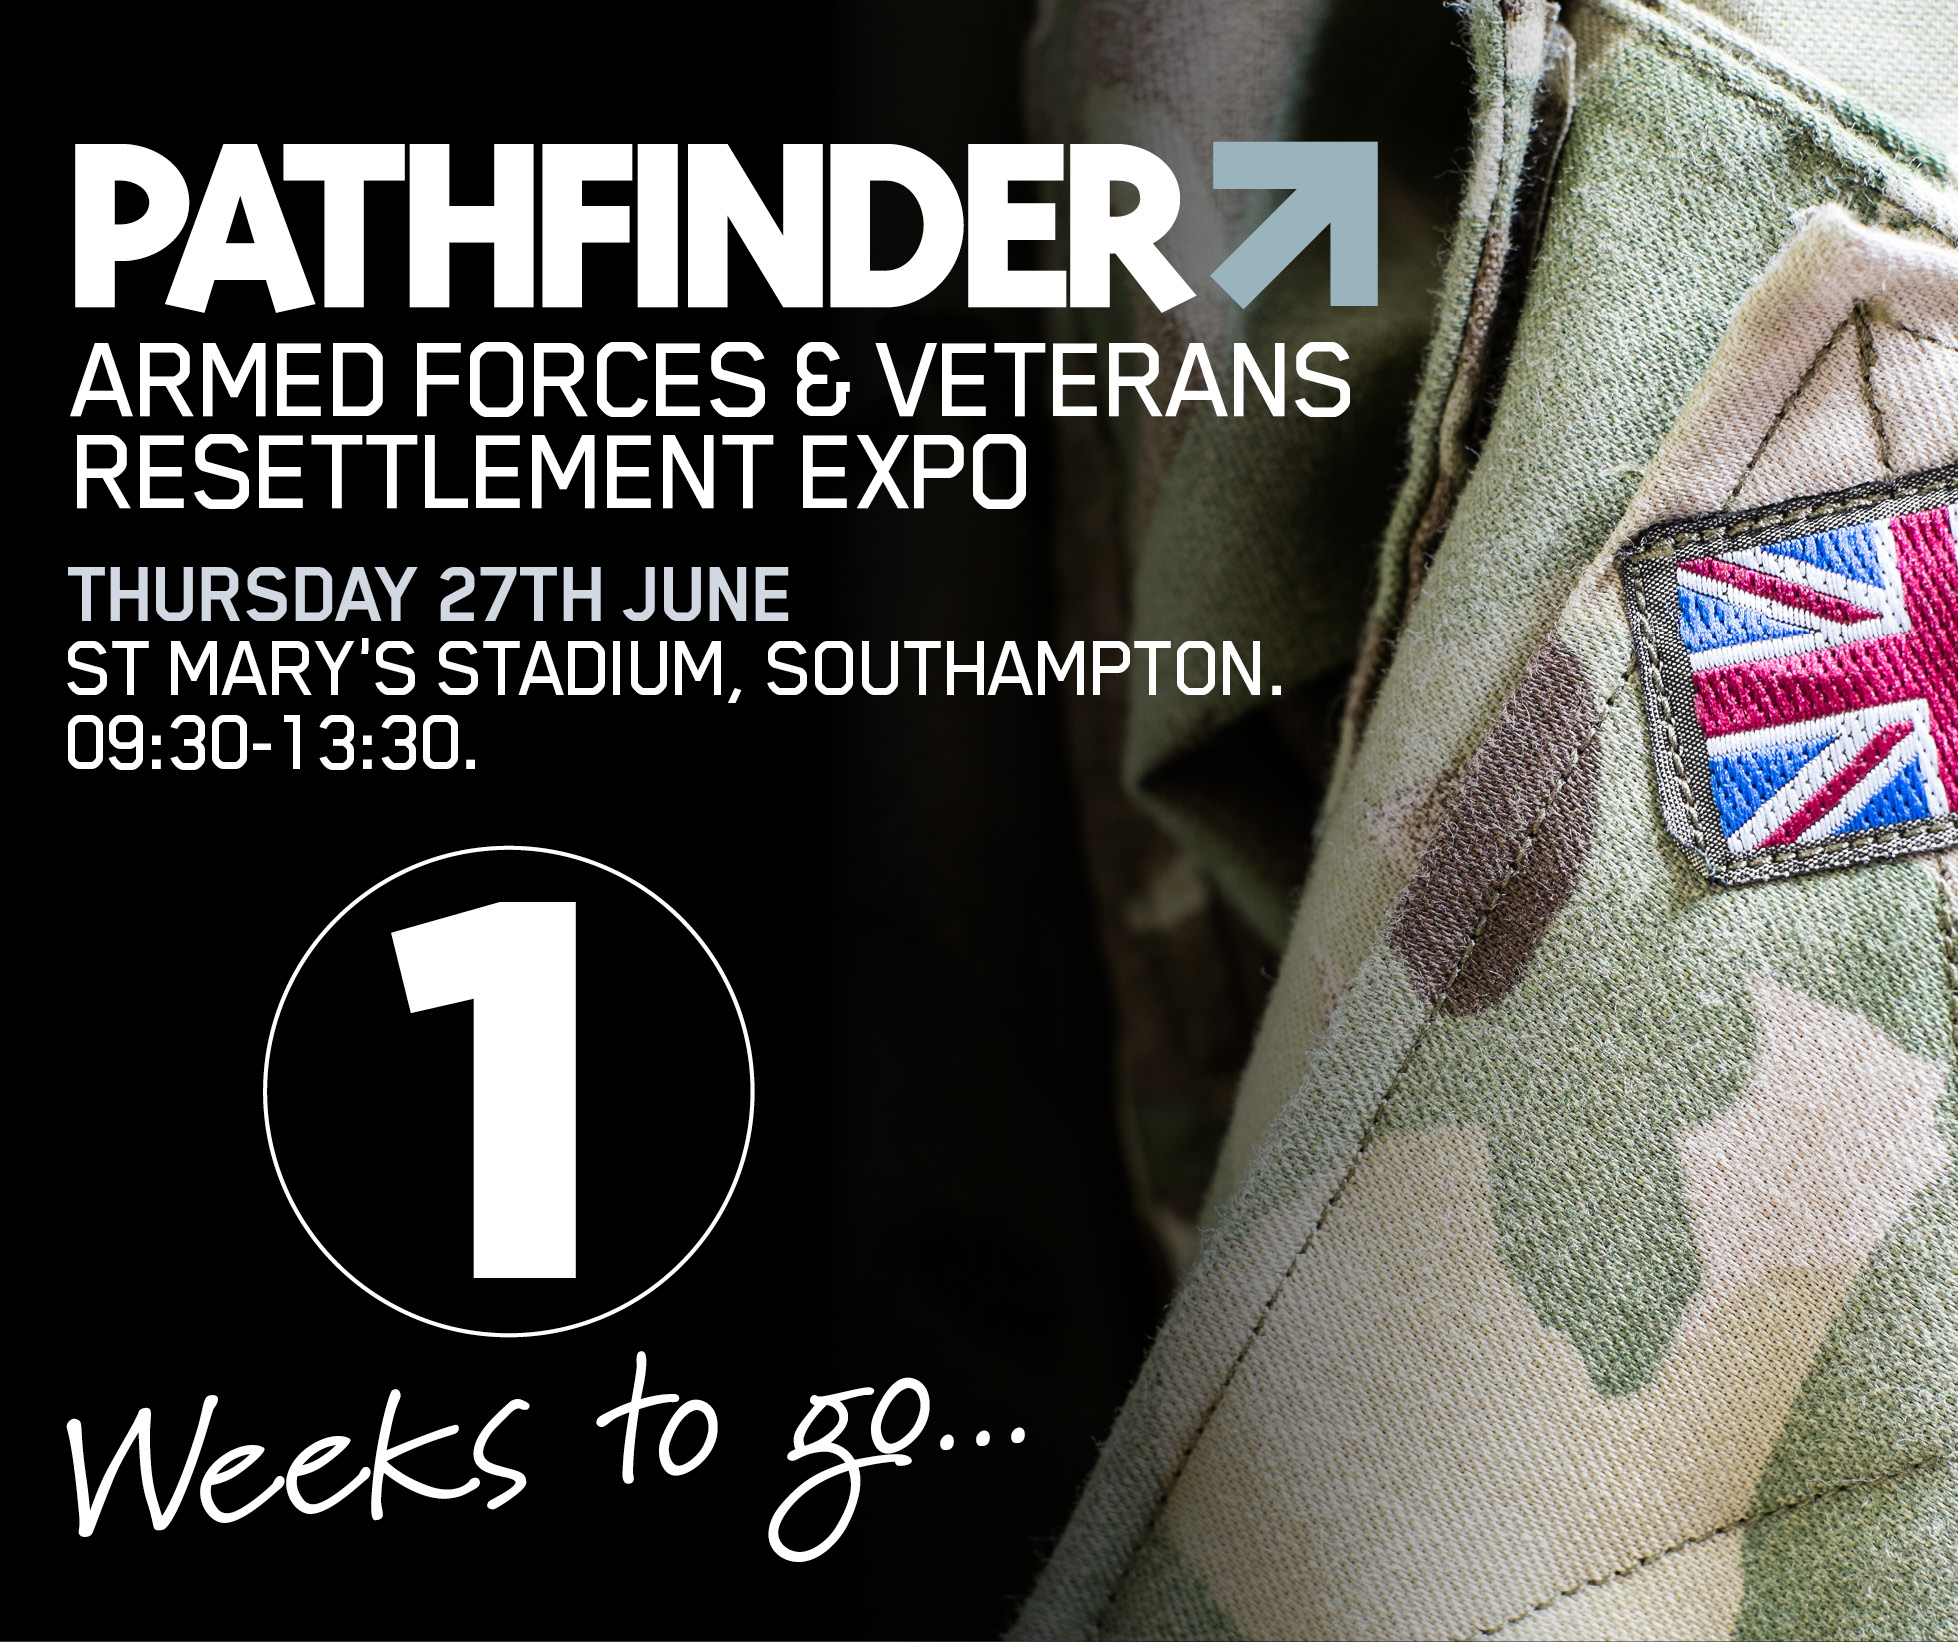 One Week To Go To The Pathfinder Southampton Expo